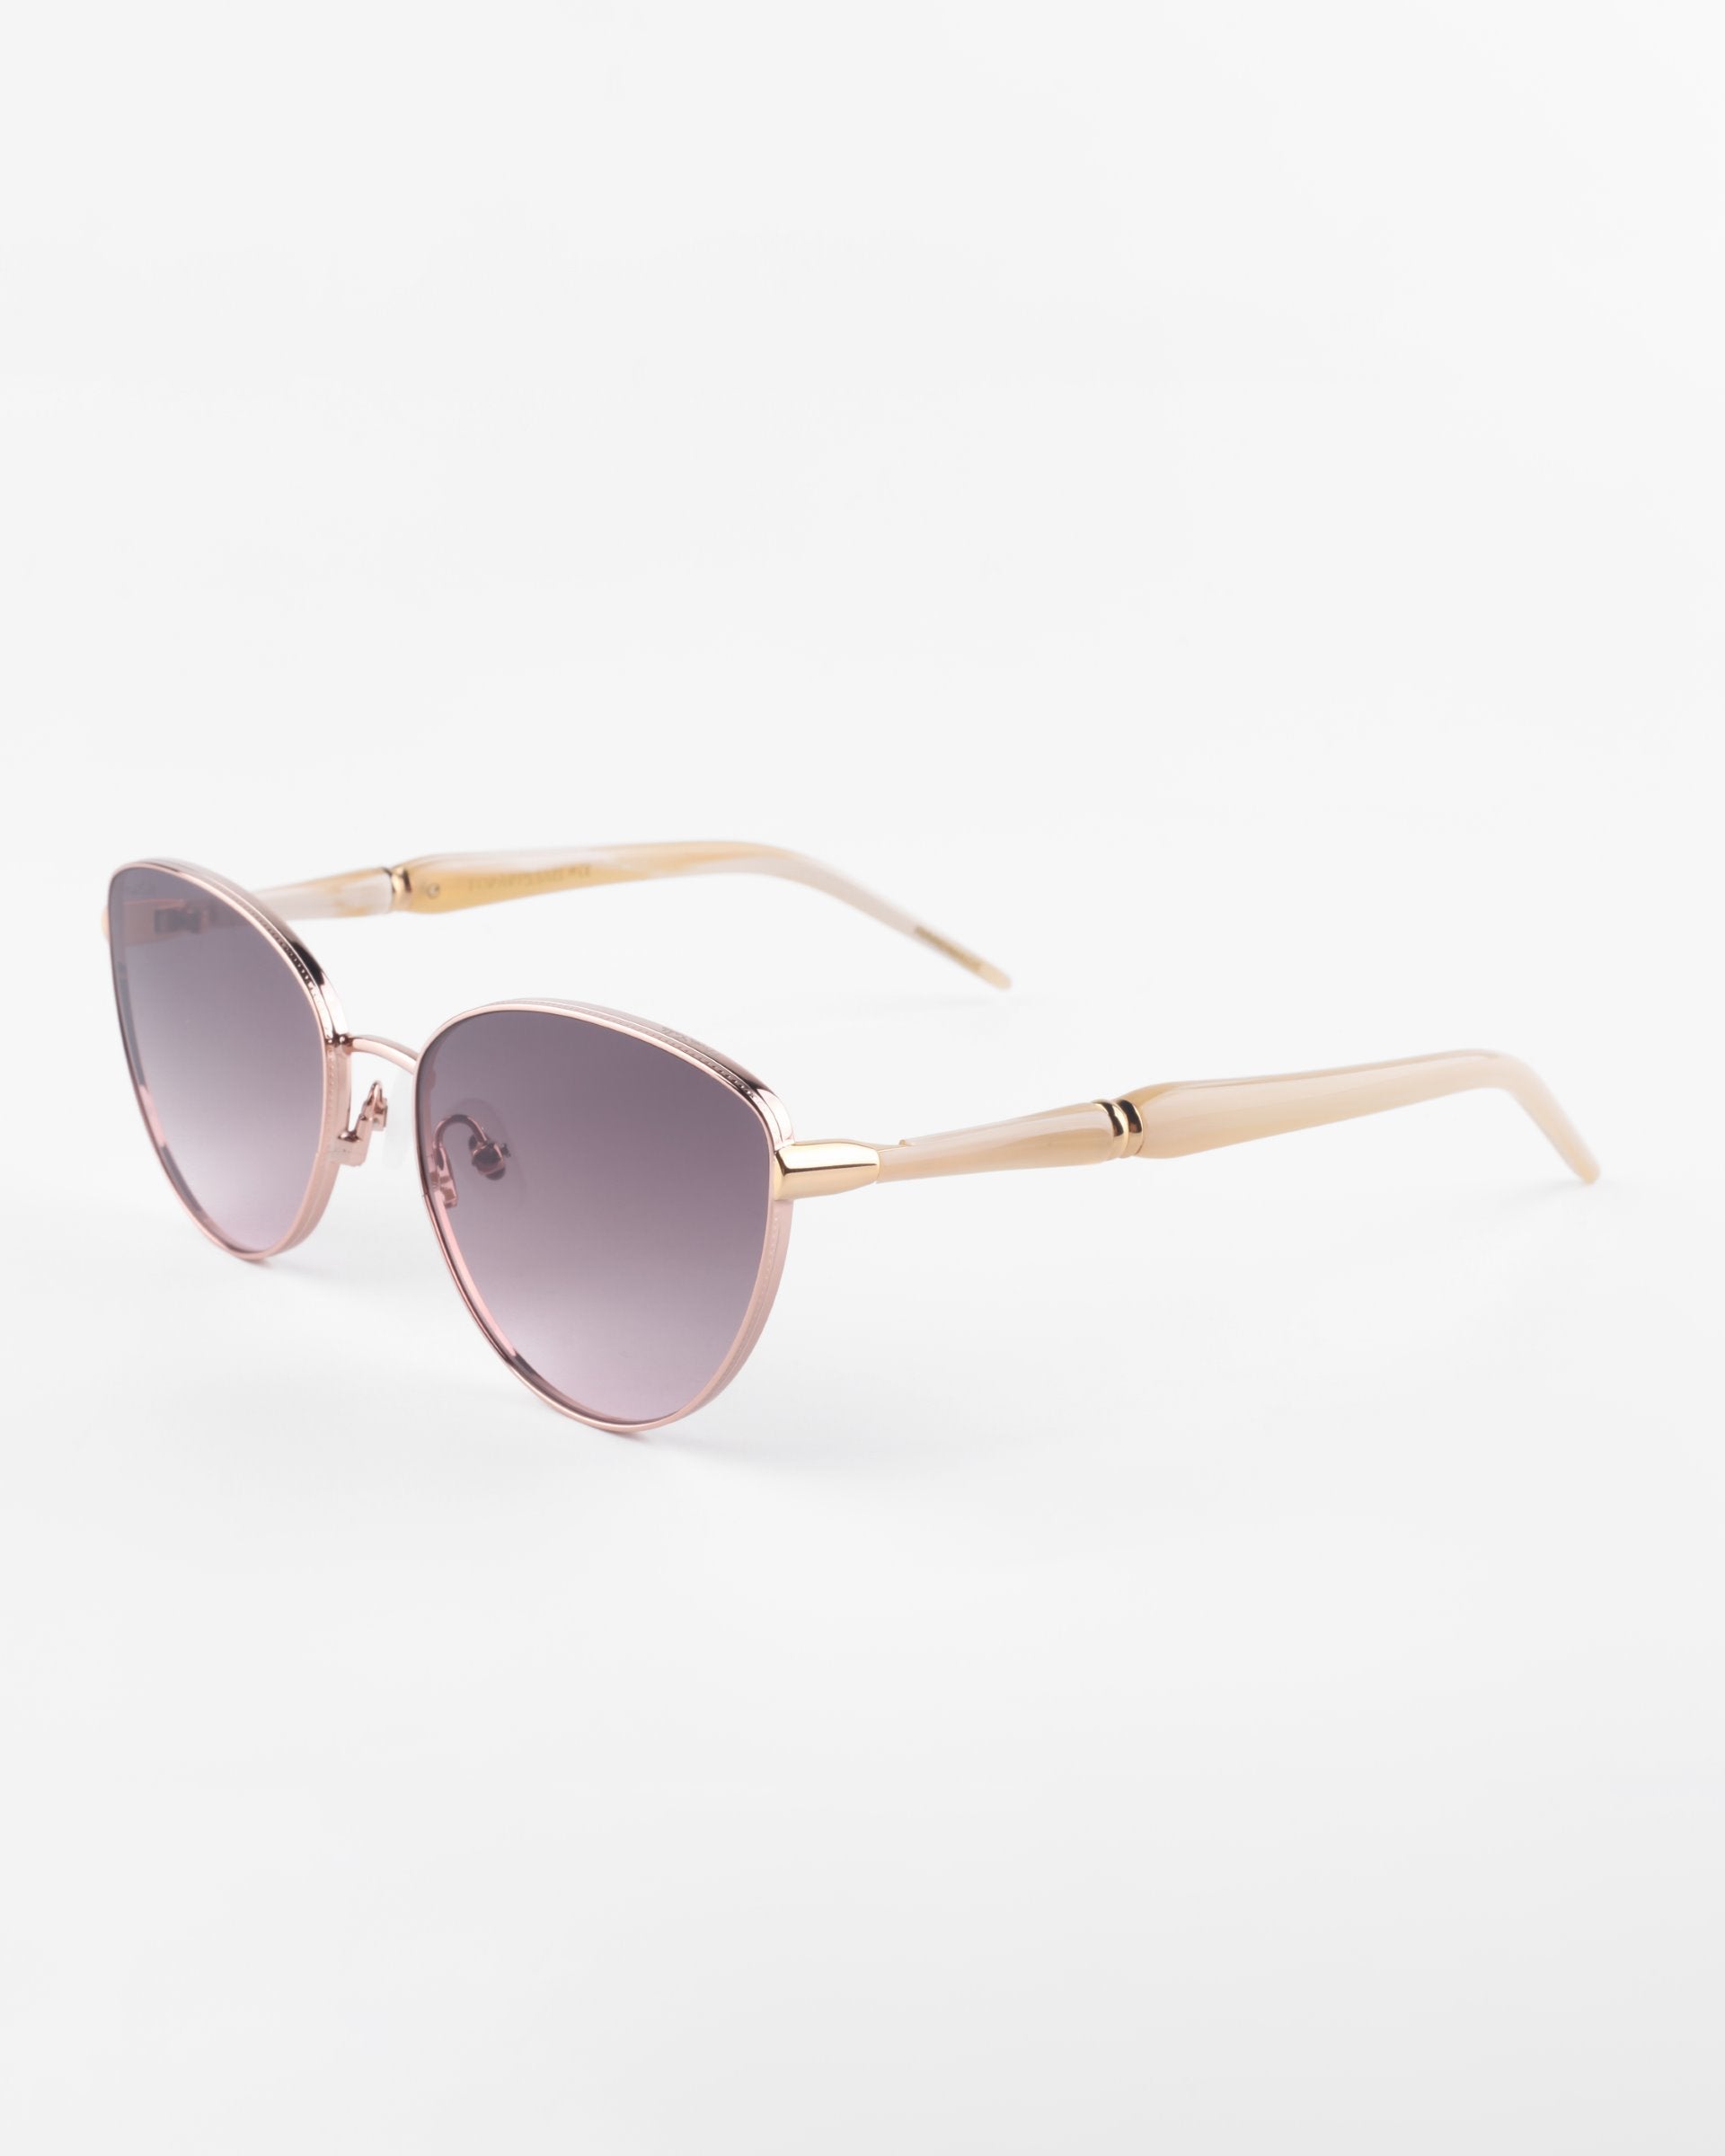 A pair of stylish Frida Brush sunglasses by For Art&#39;s Sake® with pink-tinted, ultra-lightweight lenses and a light pink frame. The arms of the glasses are also light pink and slightly angled outward, ensuring comfort. With UVA &amp; UVB protection, these Frida Brush sunglasses by For Art&#39;s Sake® are photographed against a plain white background.